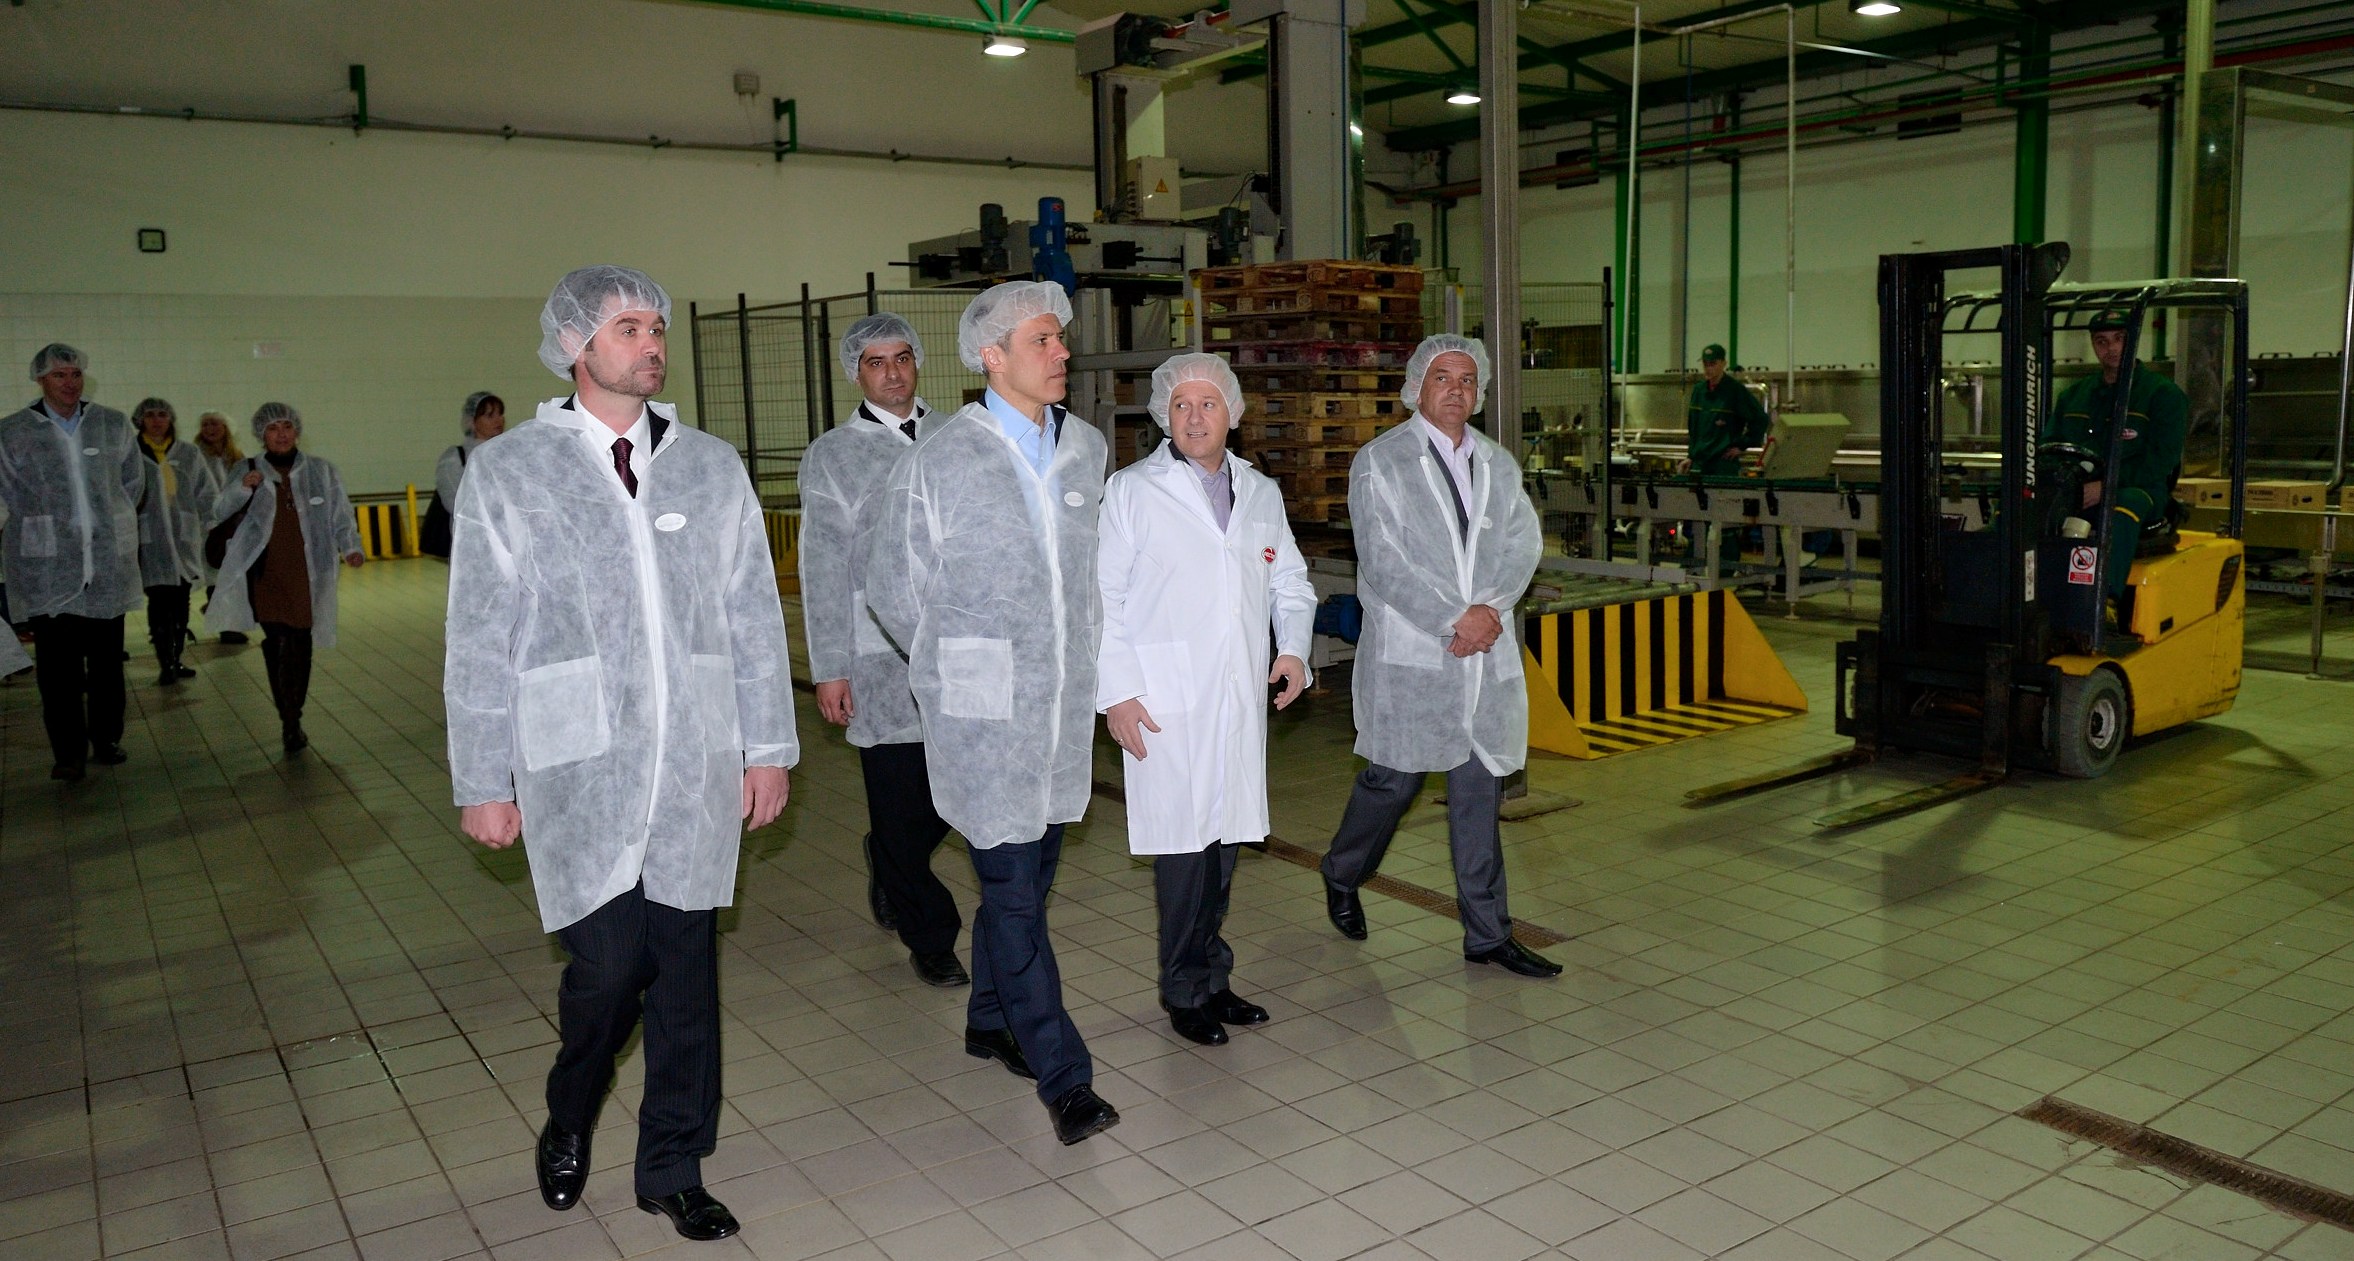 five people in lab coats walking together on a large floor